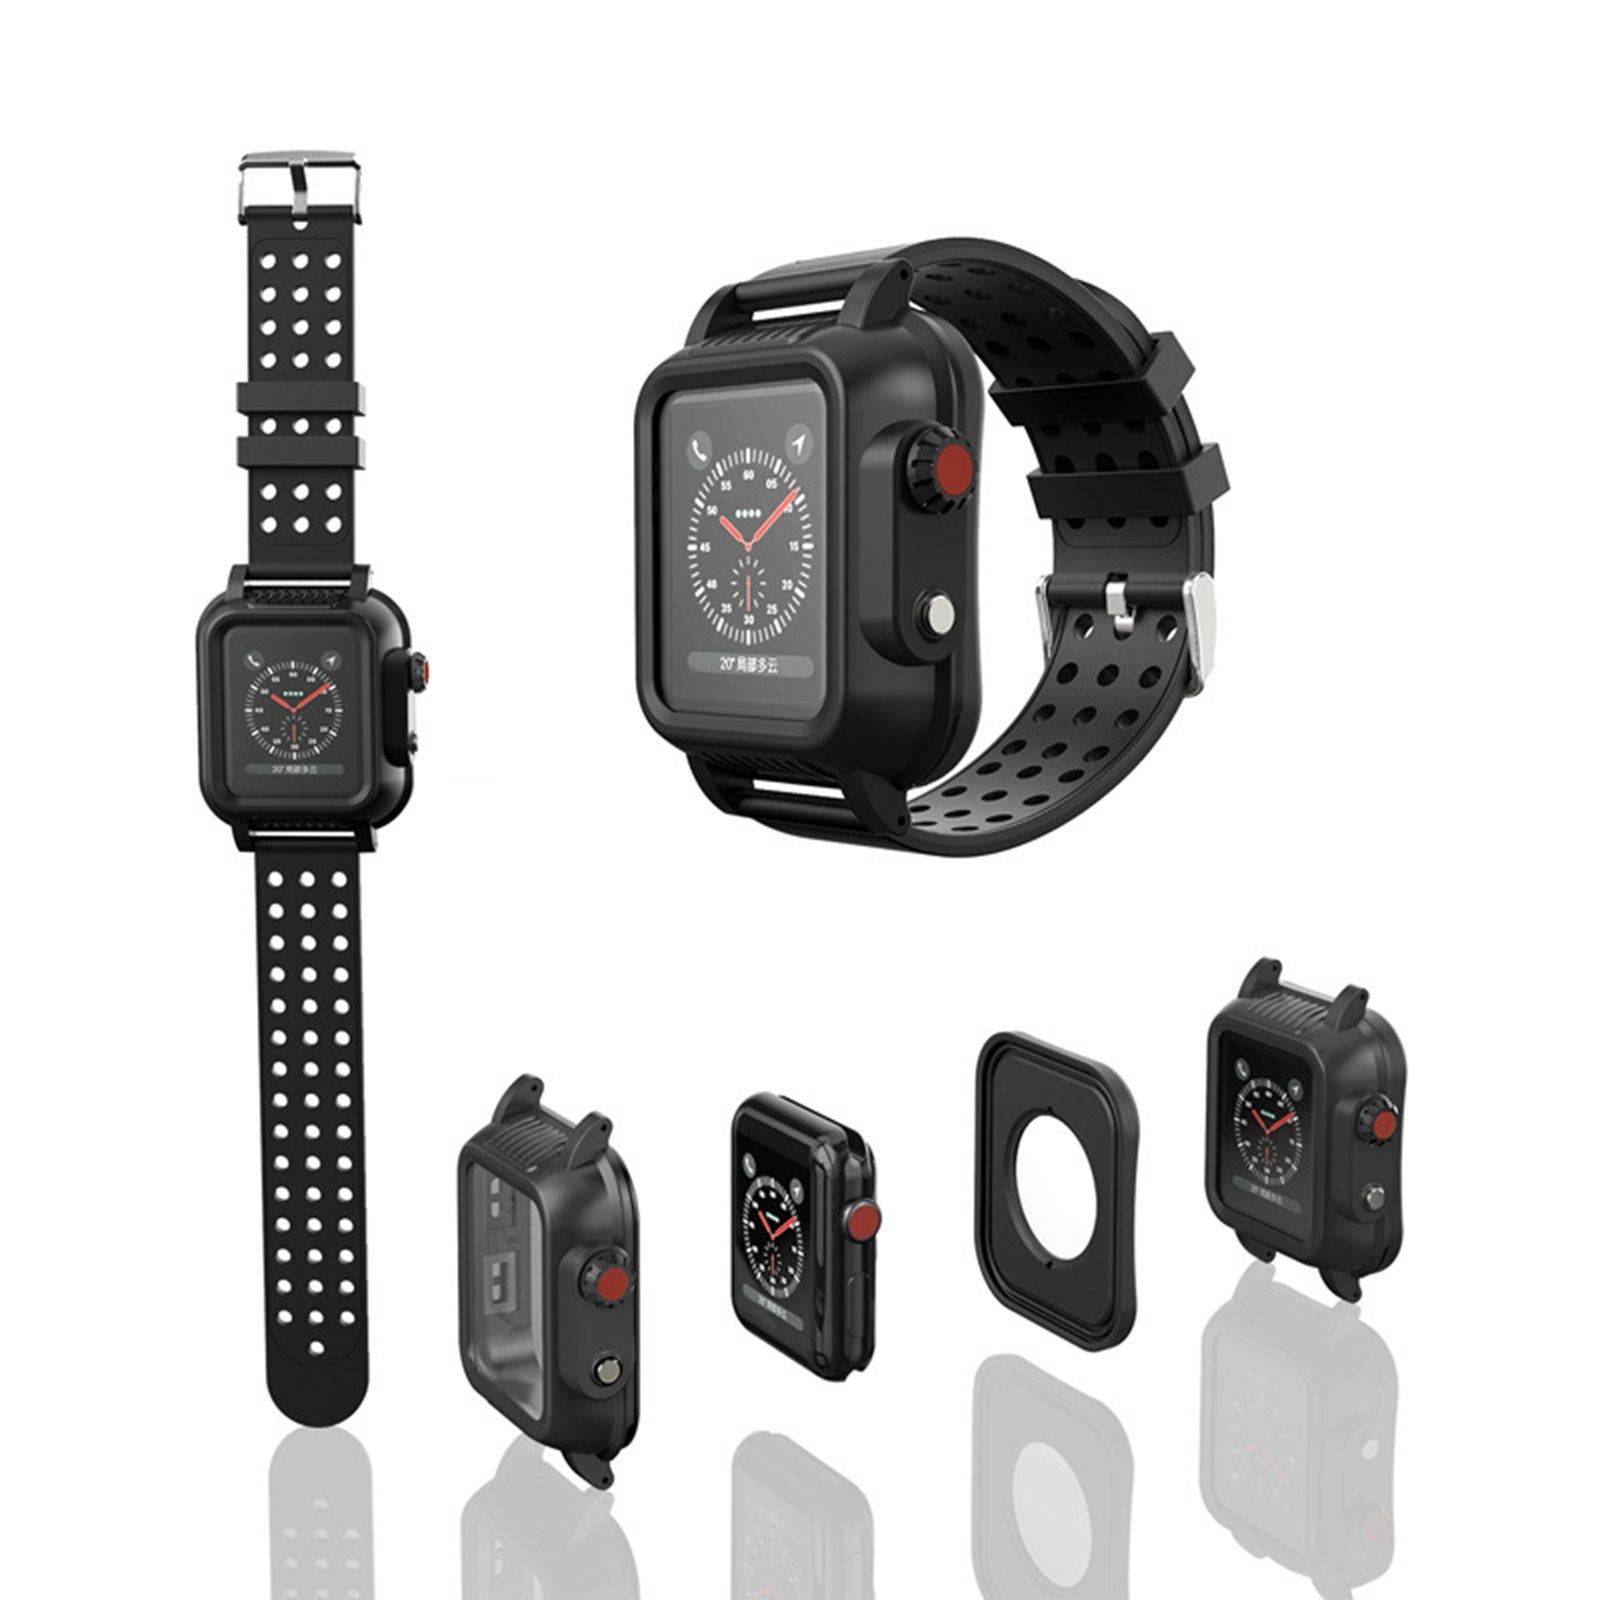 Rugged Protective Case Shockproof Durable for Apple Watch 3rd 4th Generation strap width 38mm